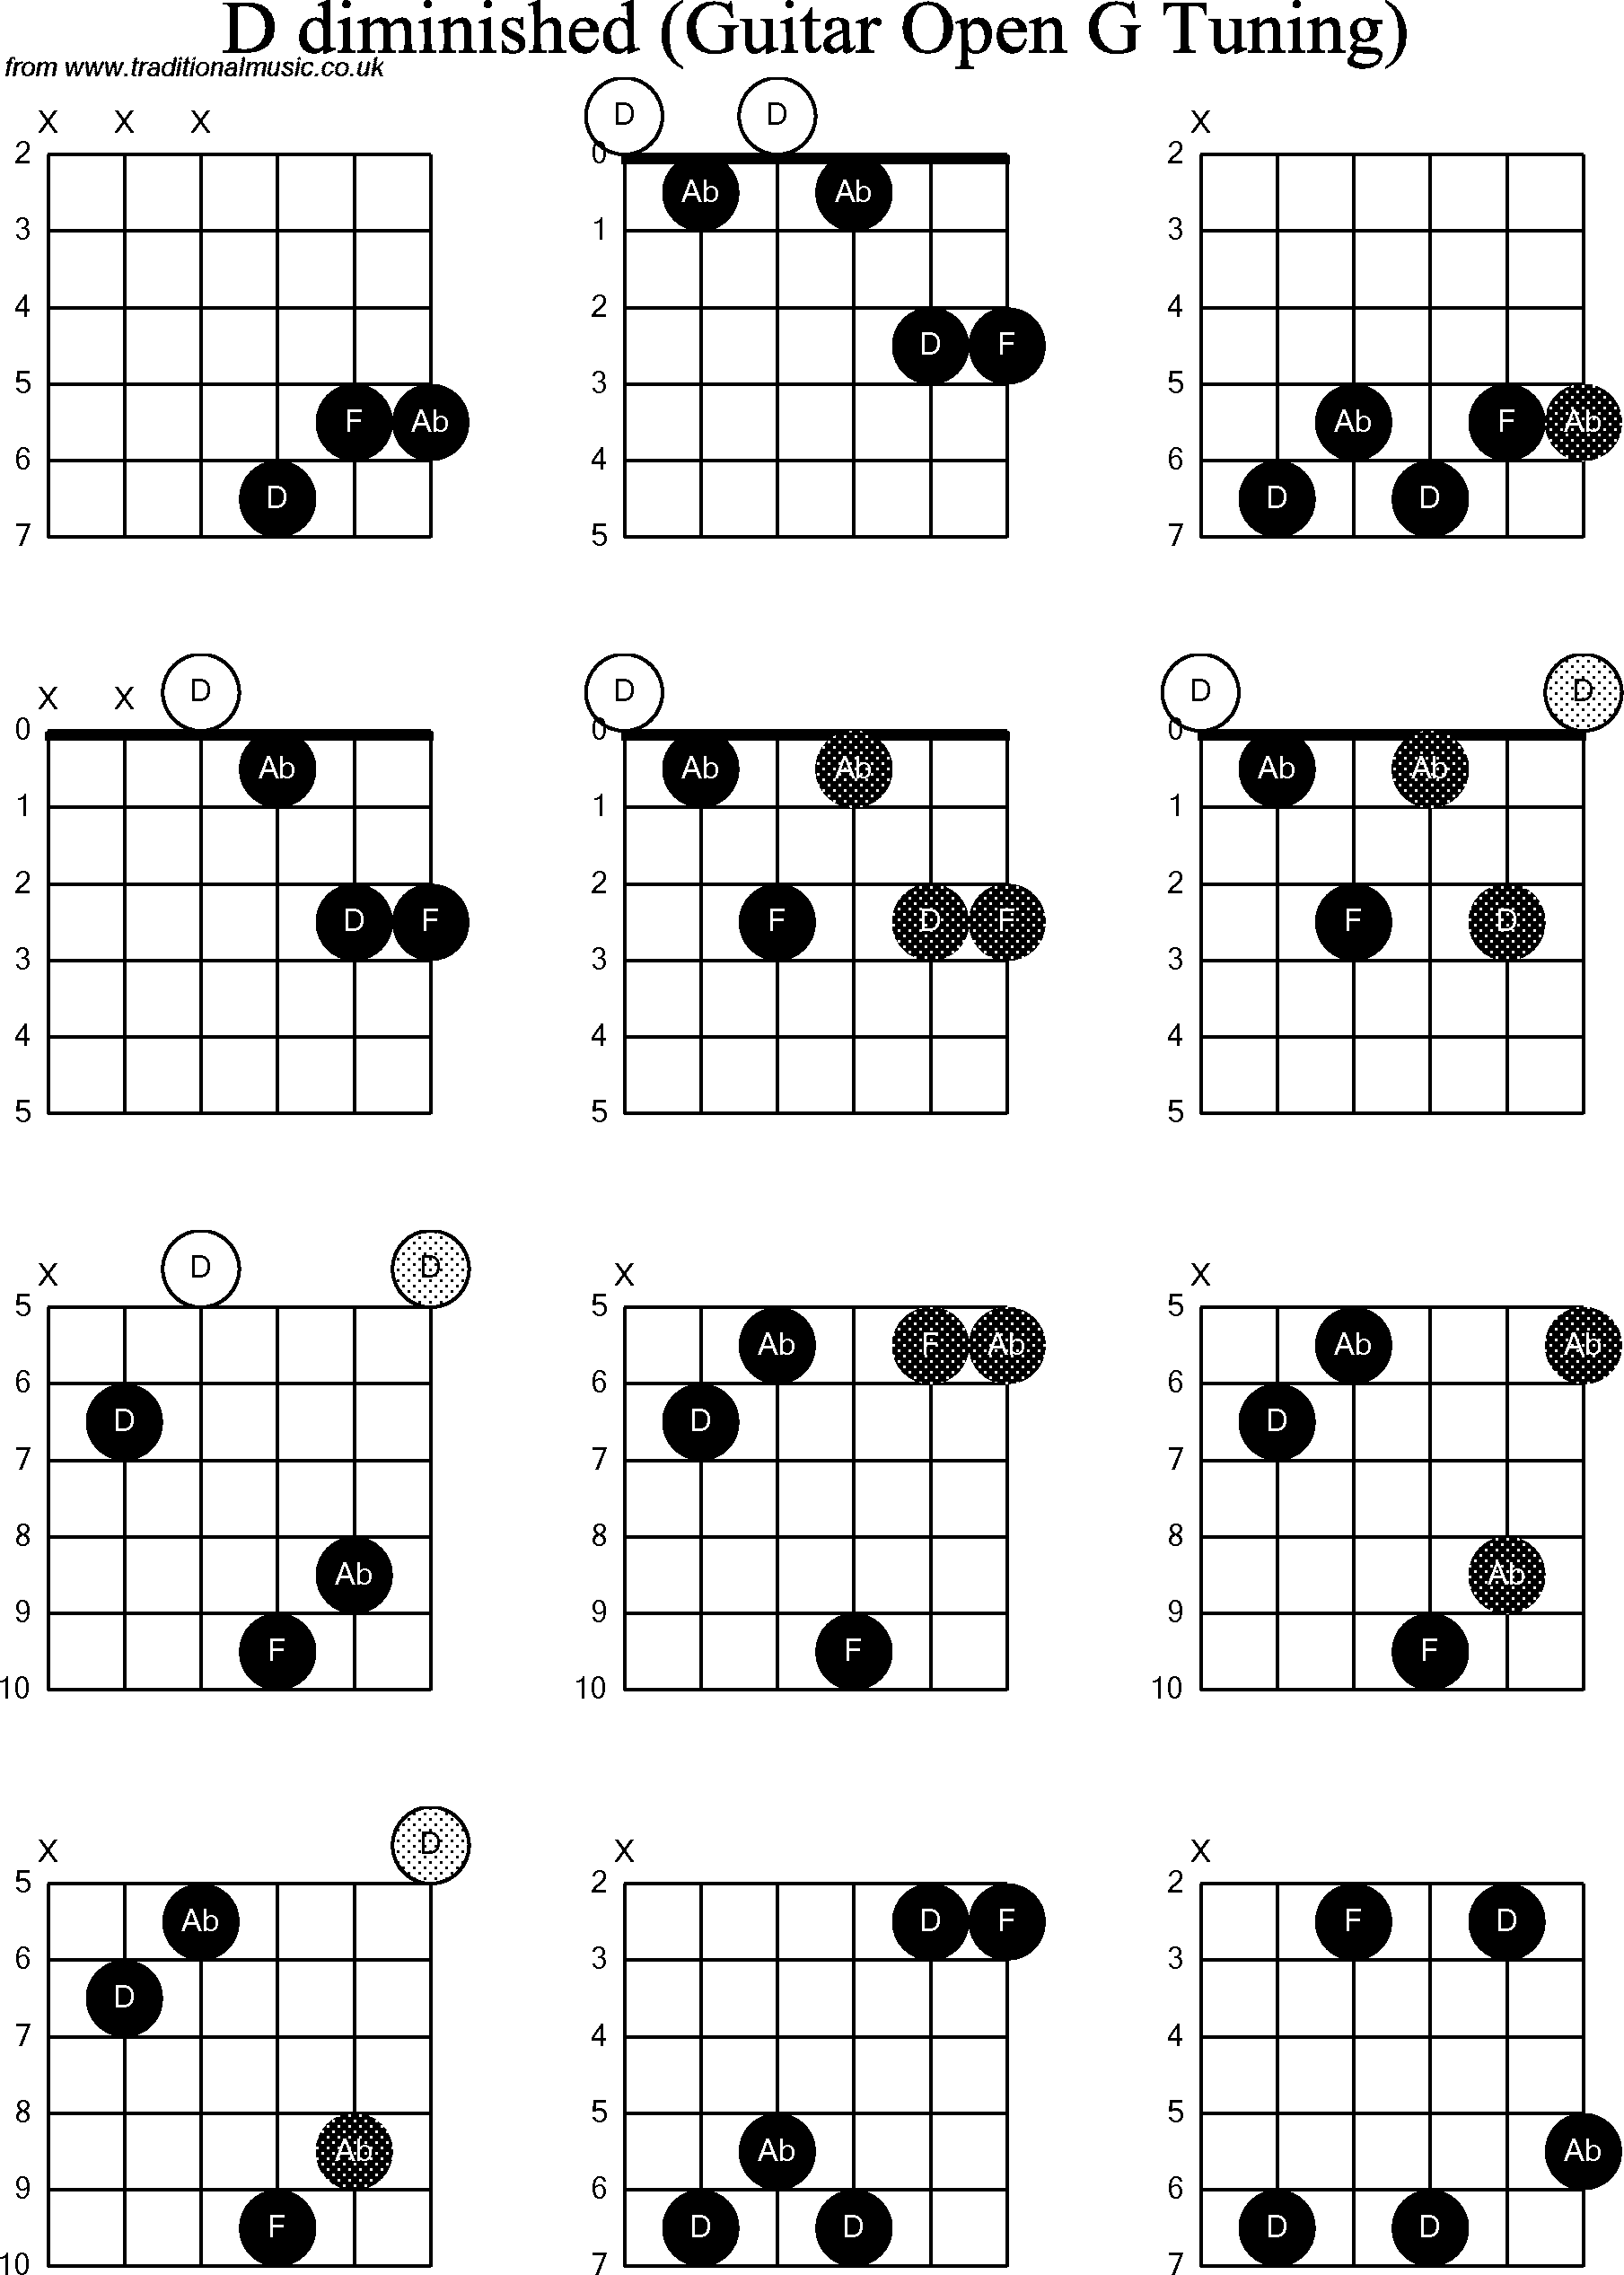 Chord diagrams for Dobro D Diminished